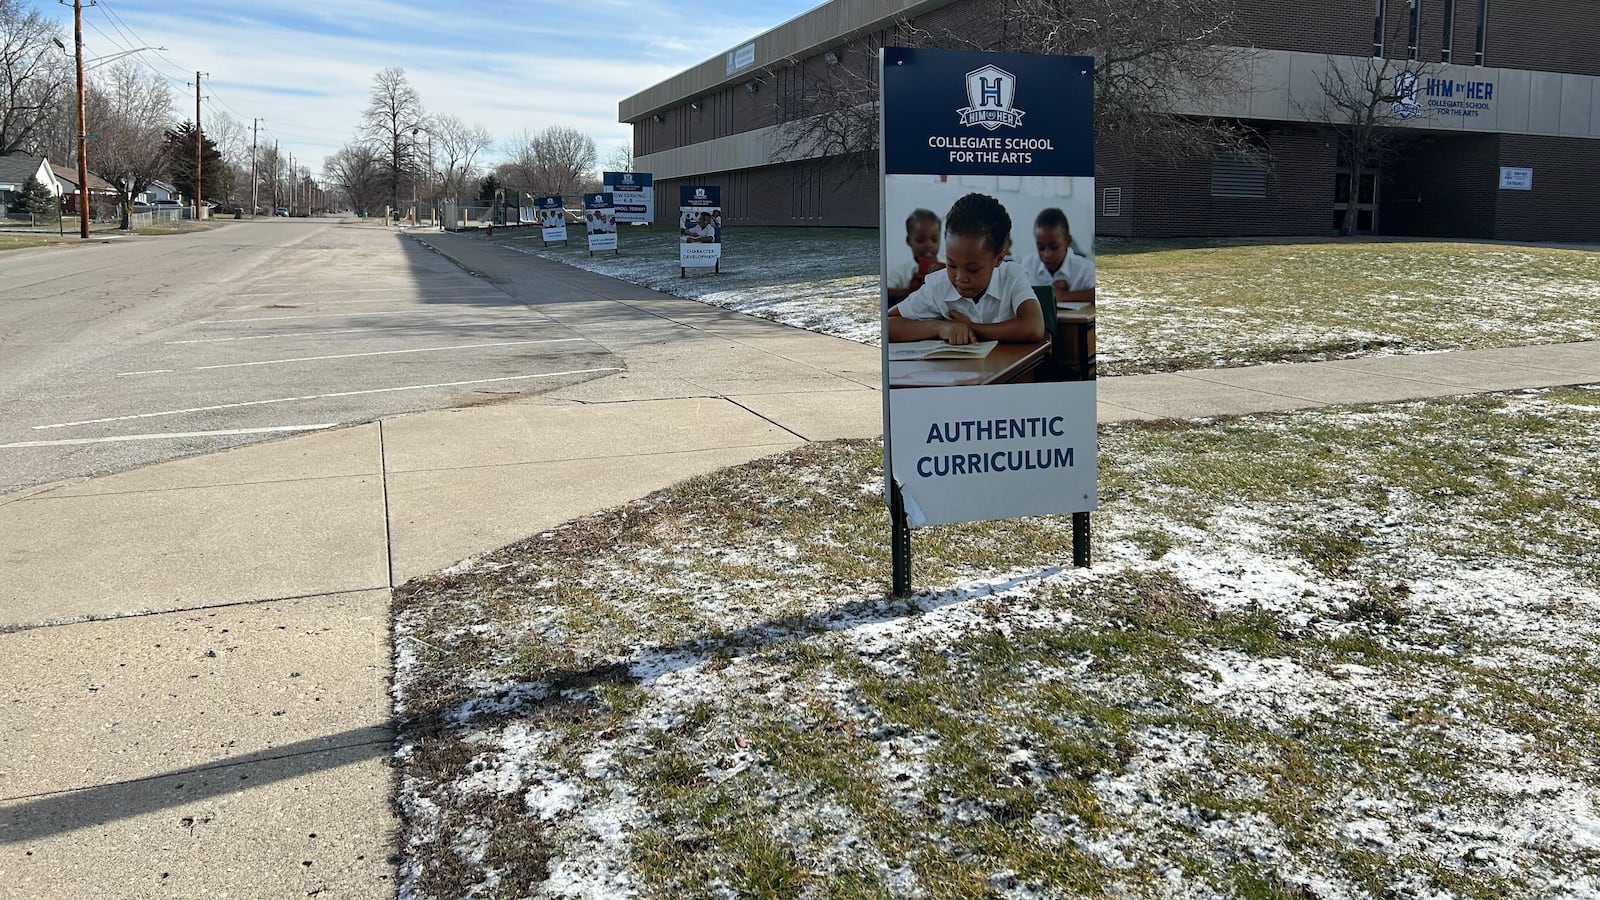 A sign reading “Him by Her Collegiate School for the Arts” stands in a snowy ground with similar signs in the background. In the background is a brick school building.